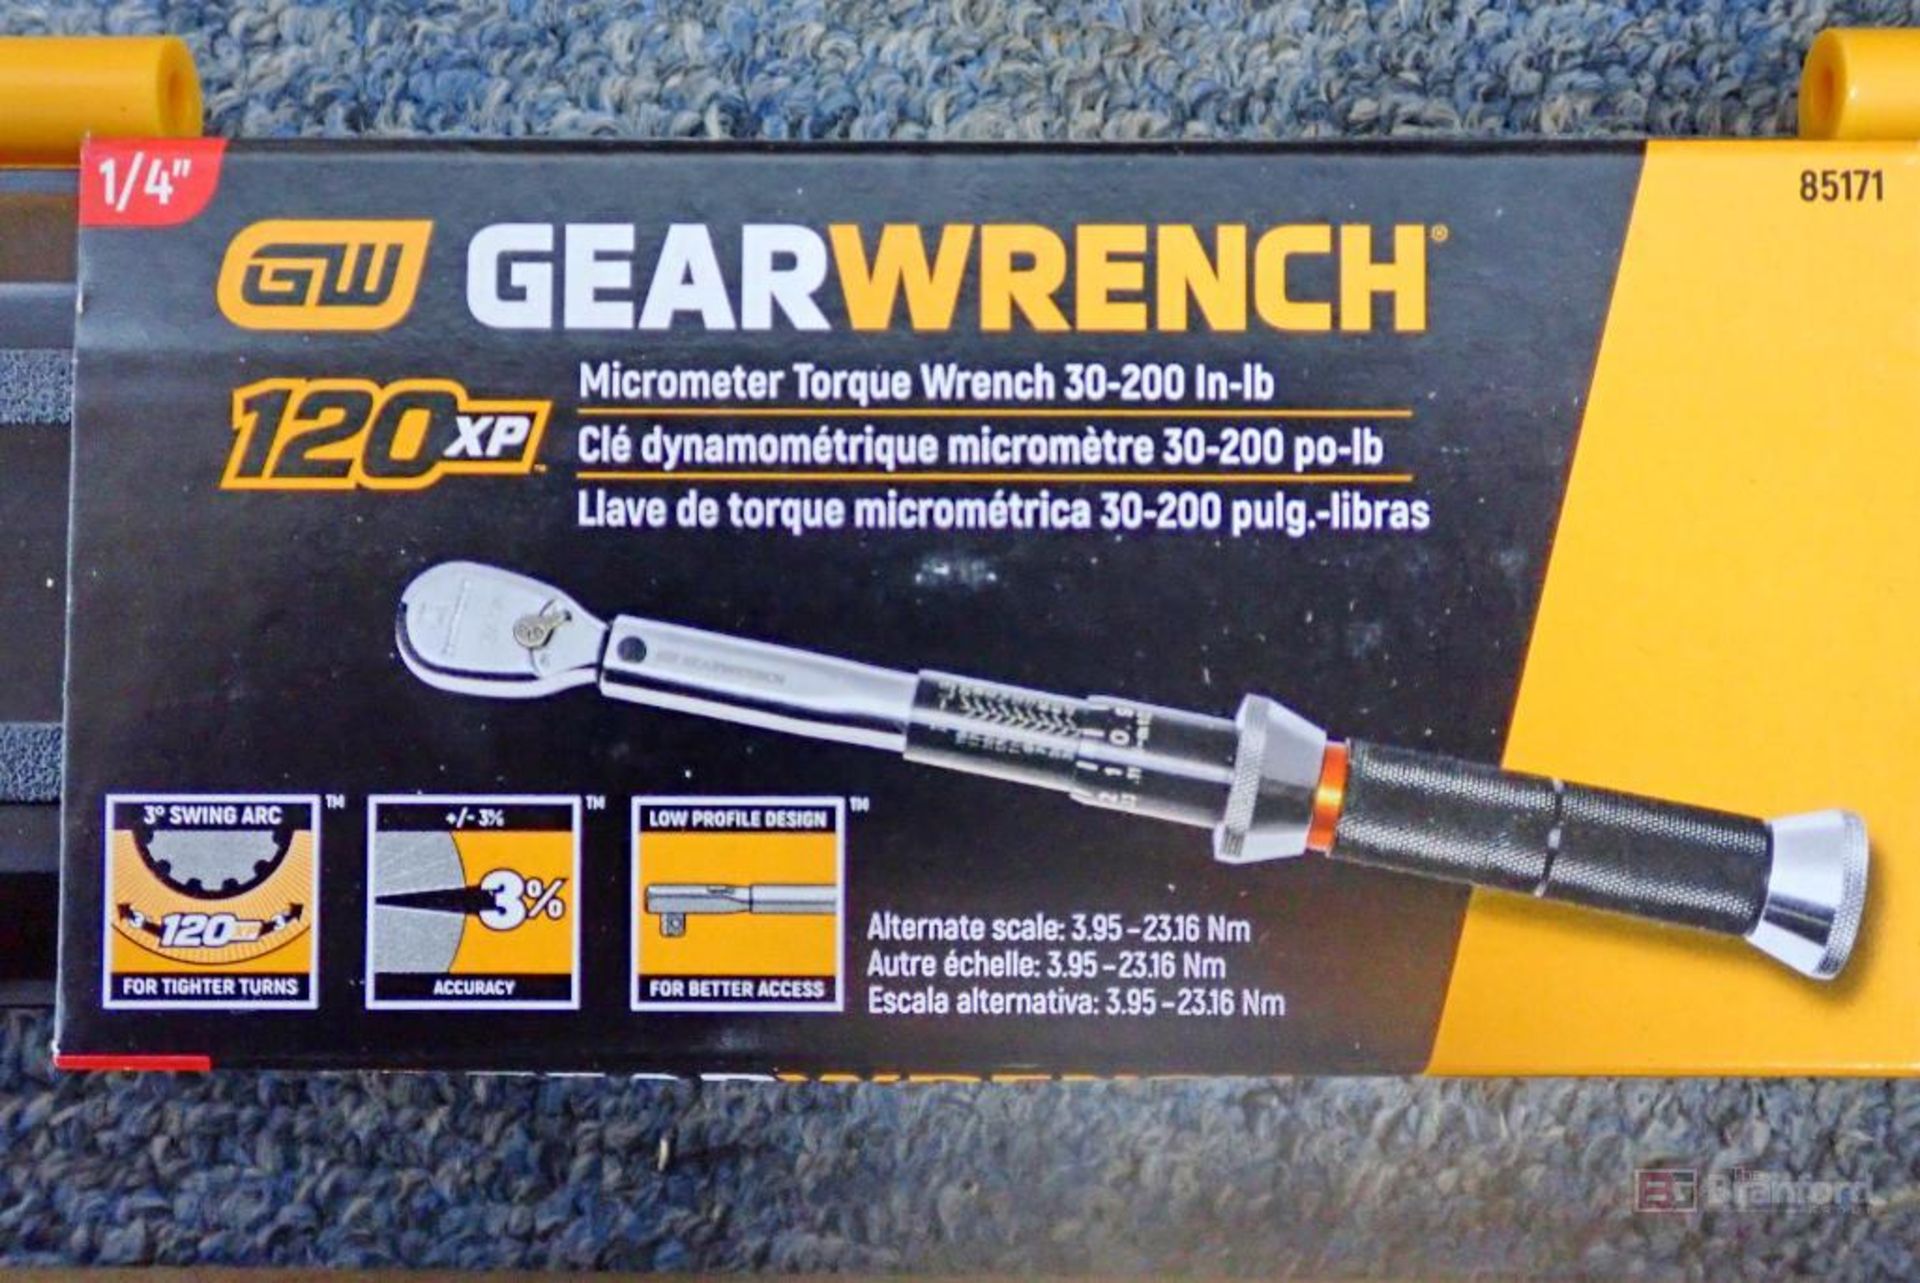 (2) GearWrench 85171 120XP 1/4" Drive Micrometer Torque Wrenches - Bild 3 aus 3